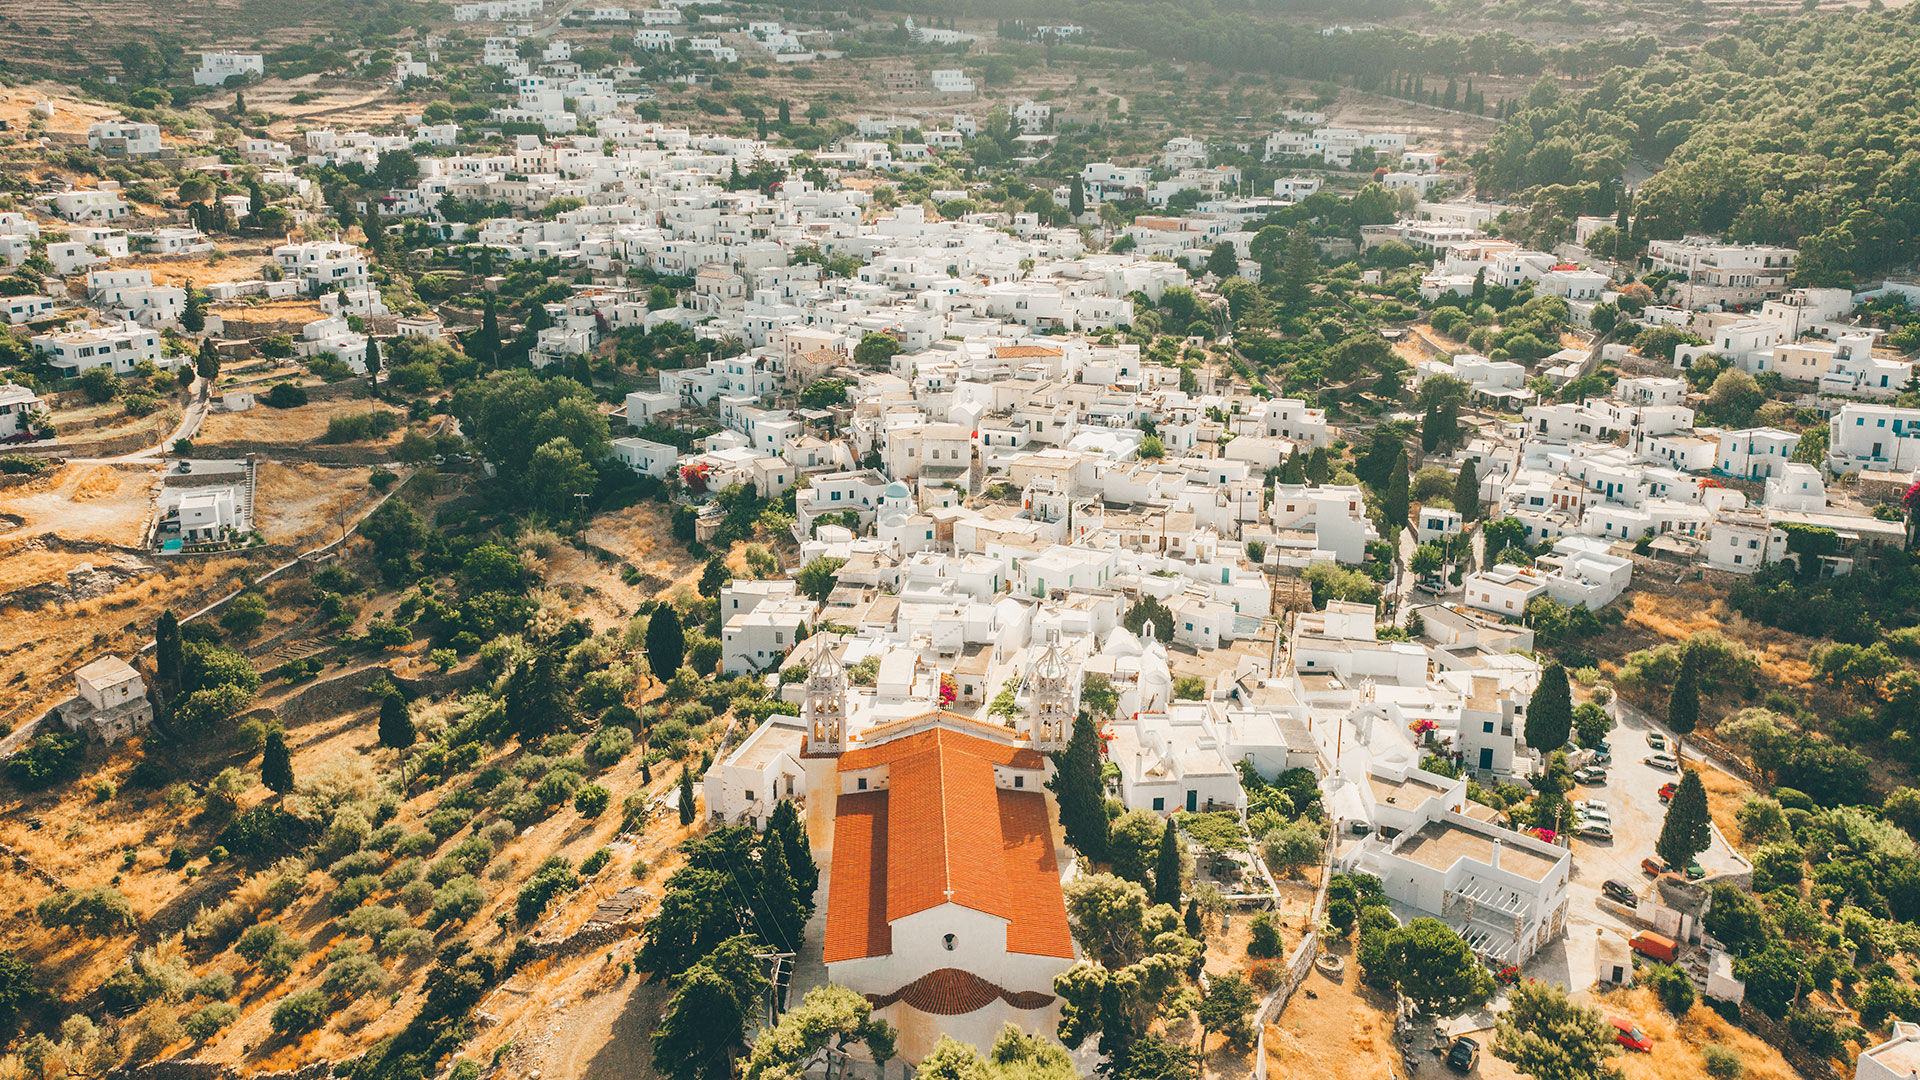 Lefkes village is surrounded by pine and olive trees and the smell of oregano and thyme